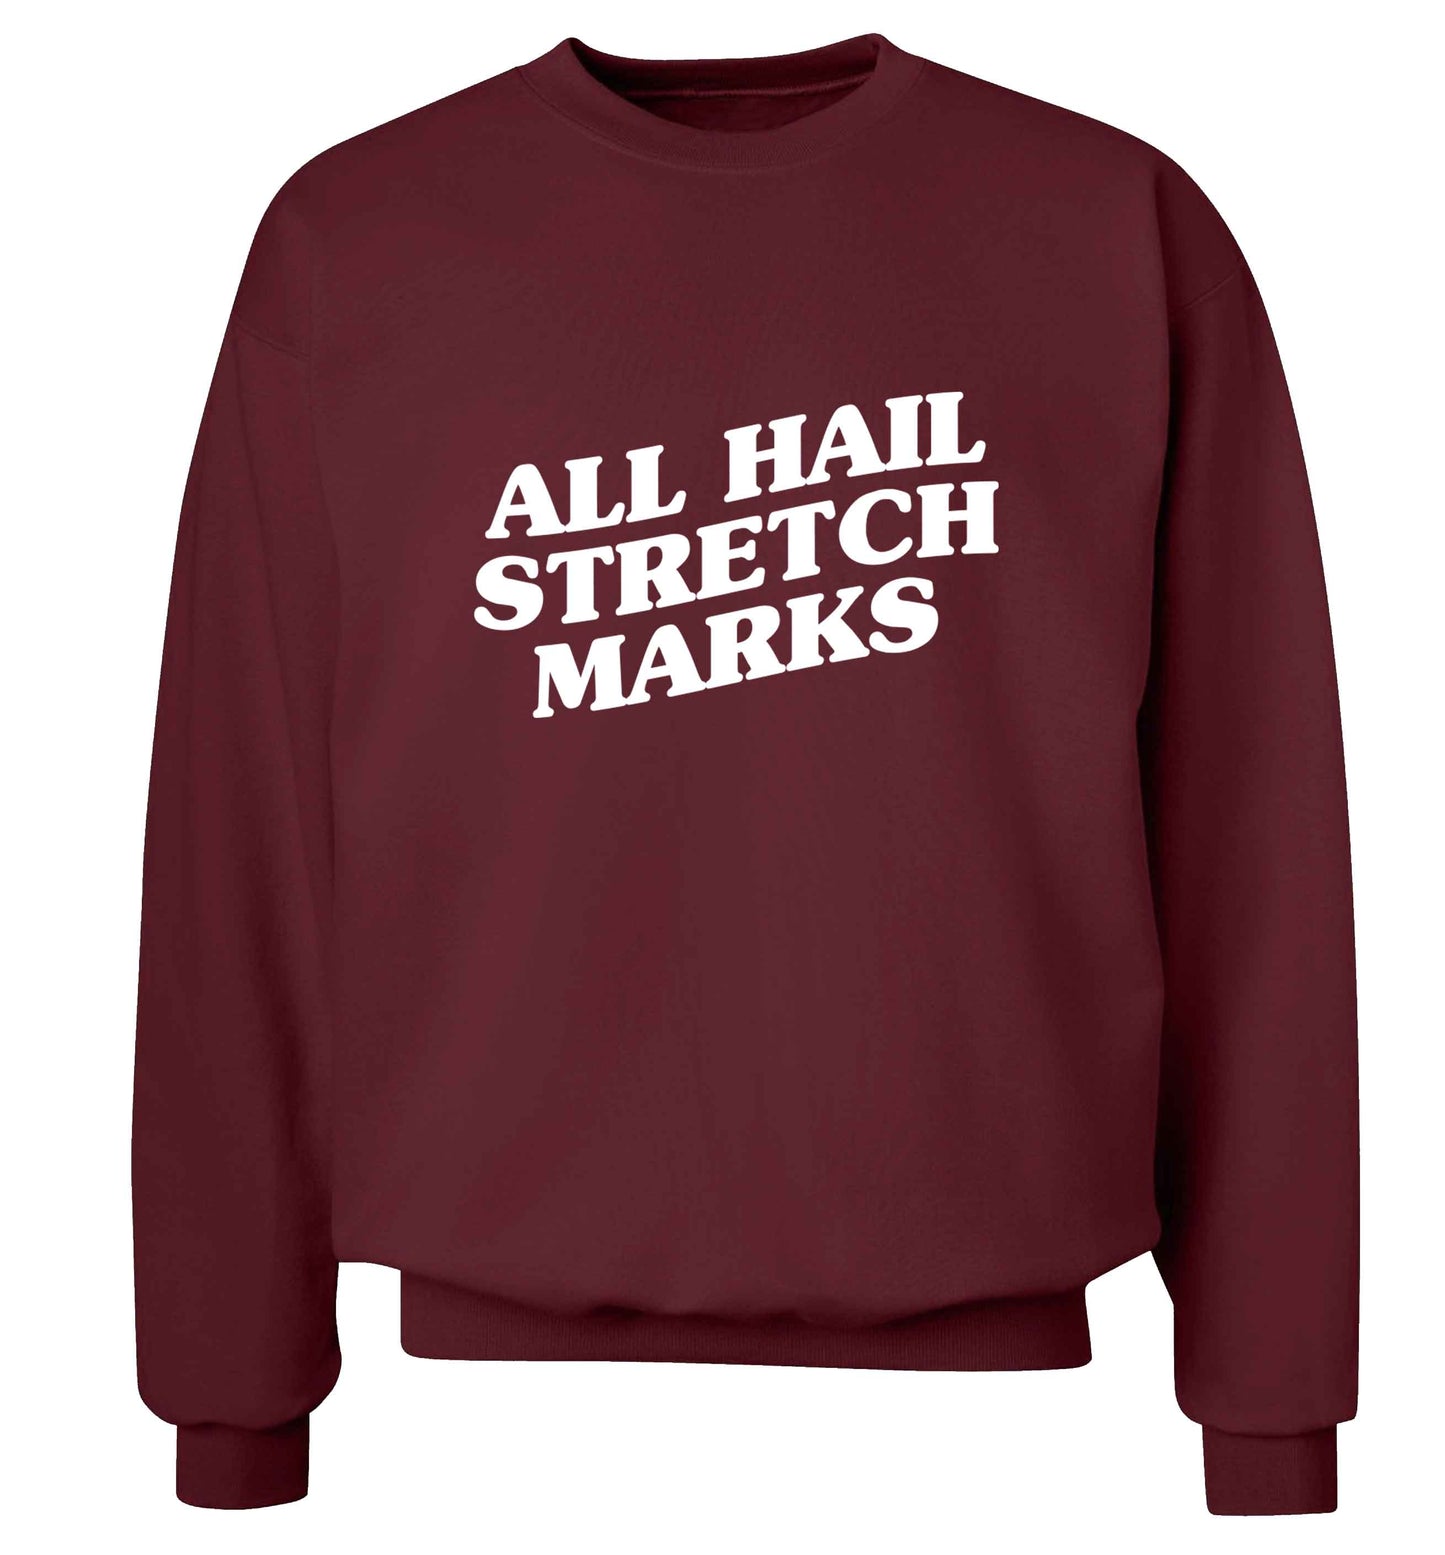 All hail stretch marks adult's unisex maroon sweater 2XL